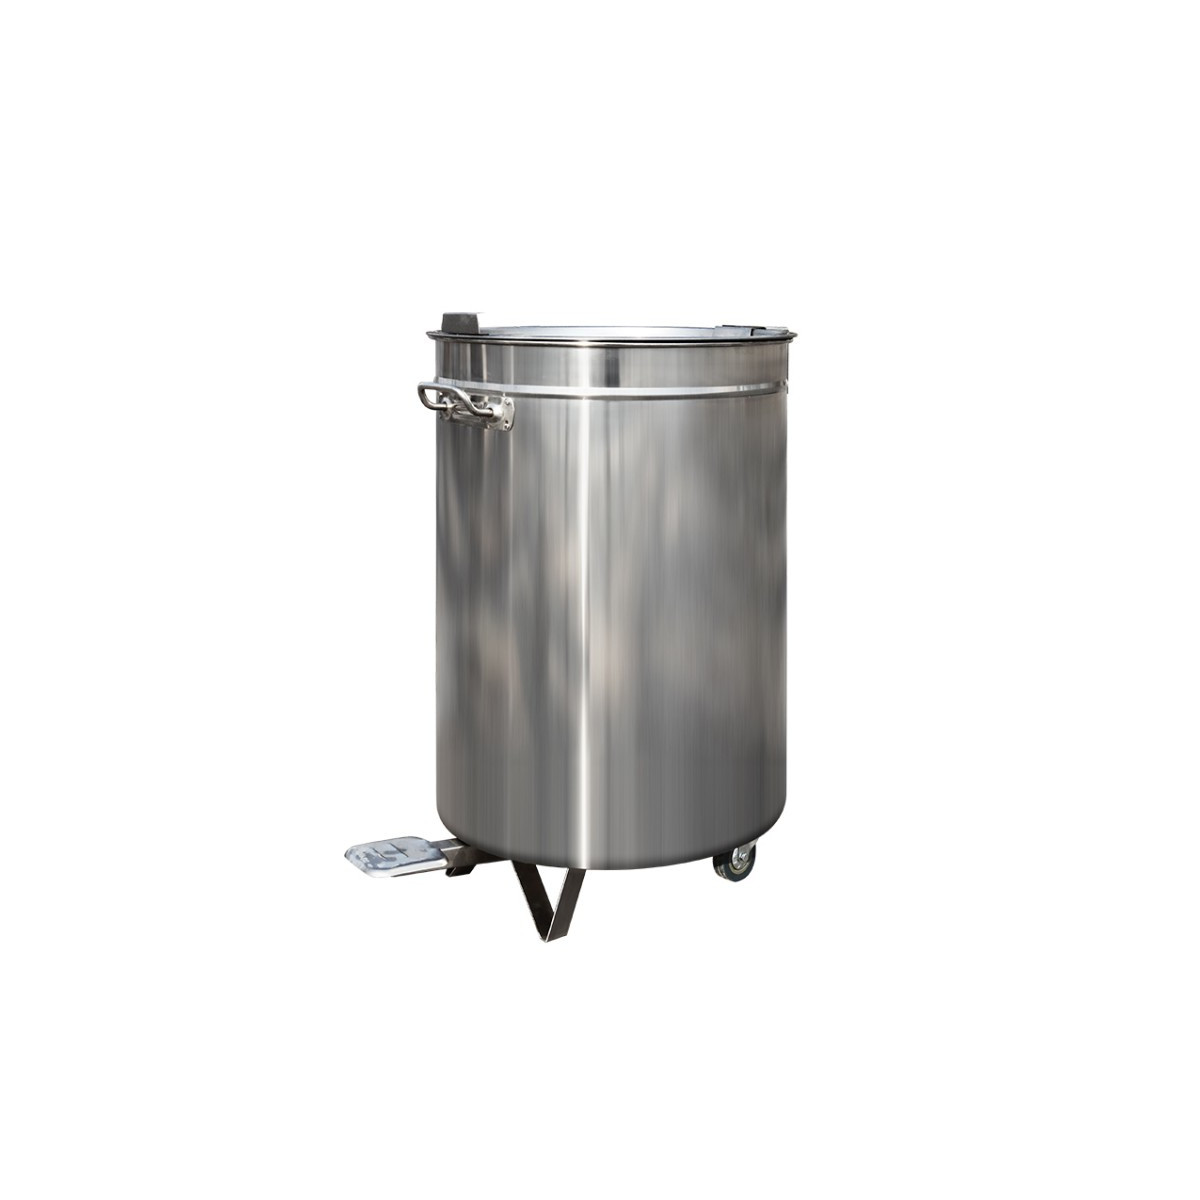 https://www.proinoxchr.fr/25942-thickbox_default/poubelle-inox-50-litres-a-pedale.jpg